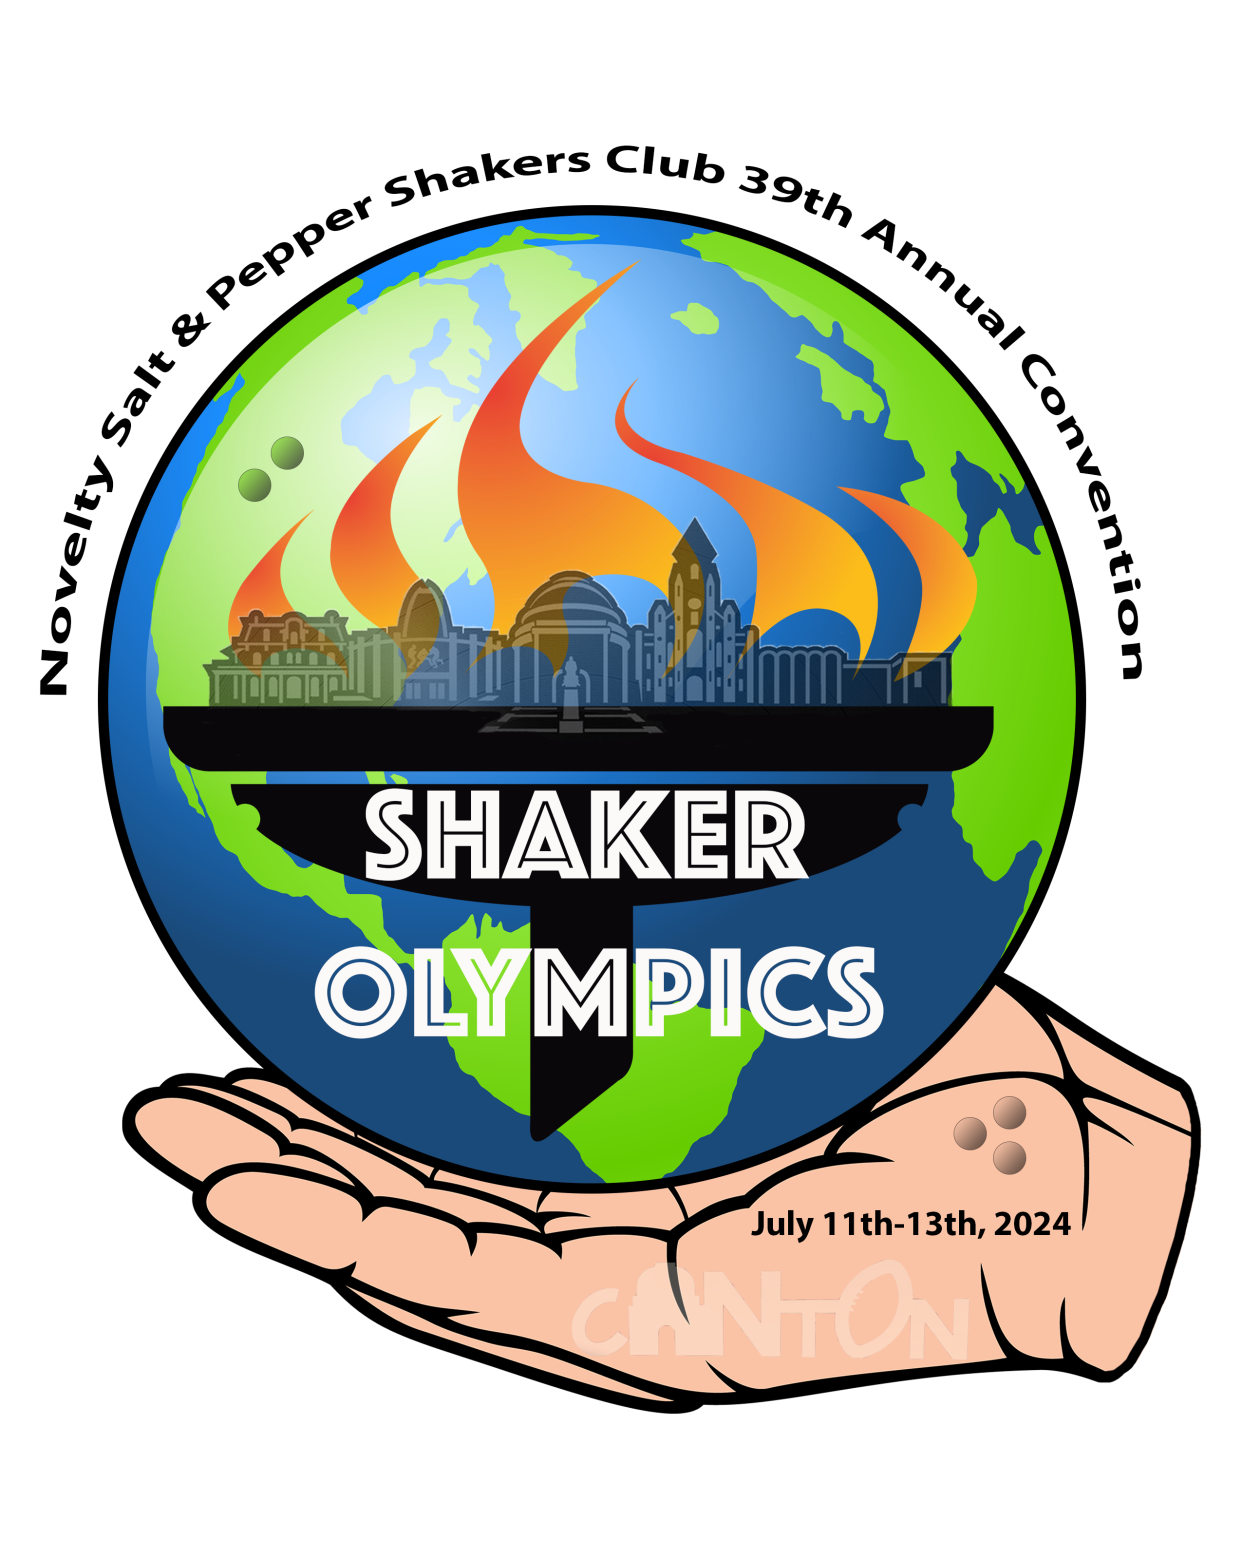 The Novelty Salt & Pepper Shakers Club Convention in Stark County in July will feature an Olympics theme.